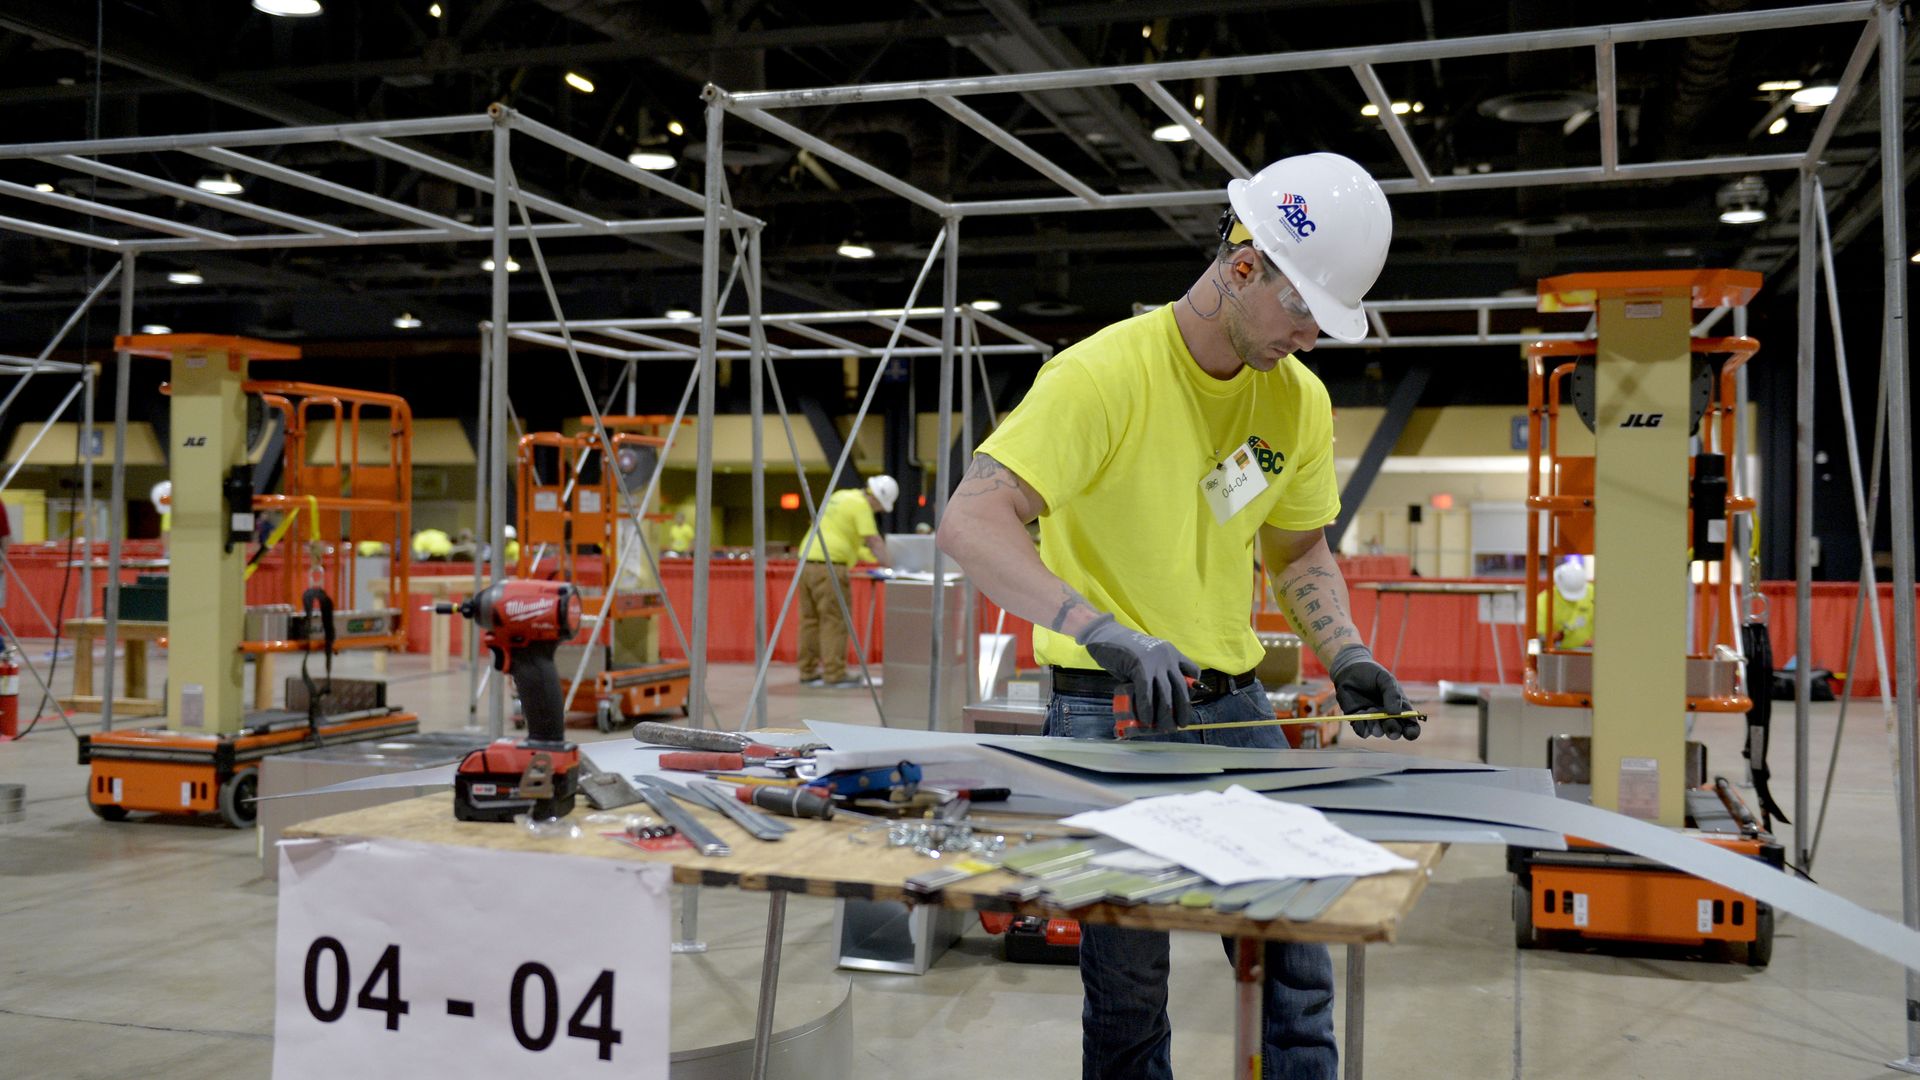 In this image, a man in a bright T-shirt and a white hard hat works over a table in a warehouse. 